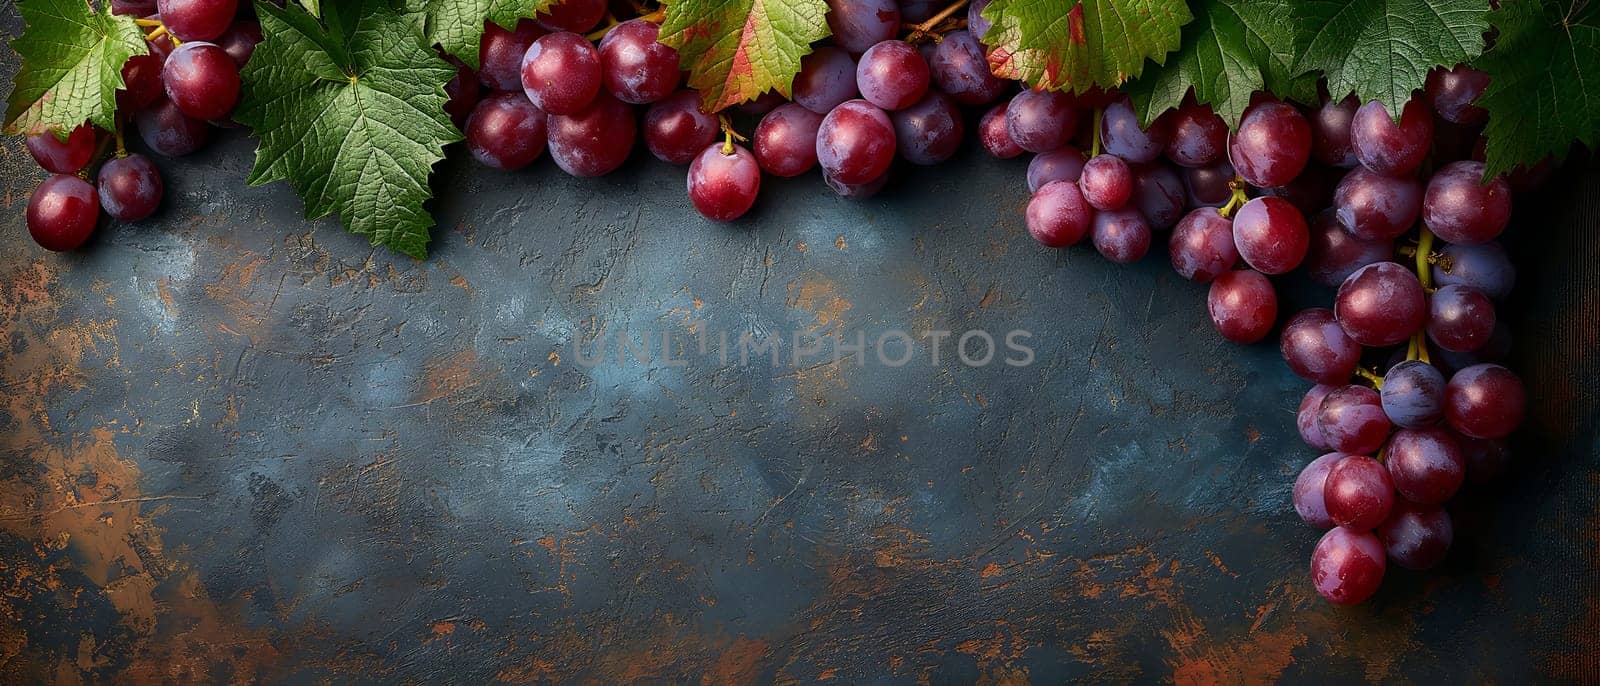 Branch of grapes on vintage background. by Fischeron